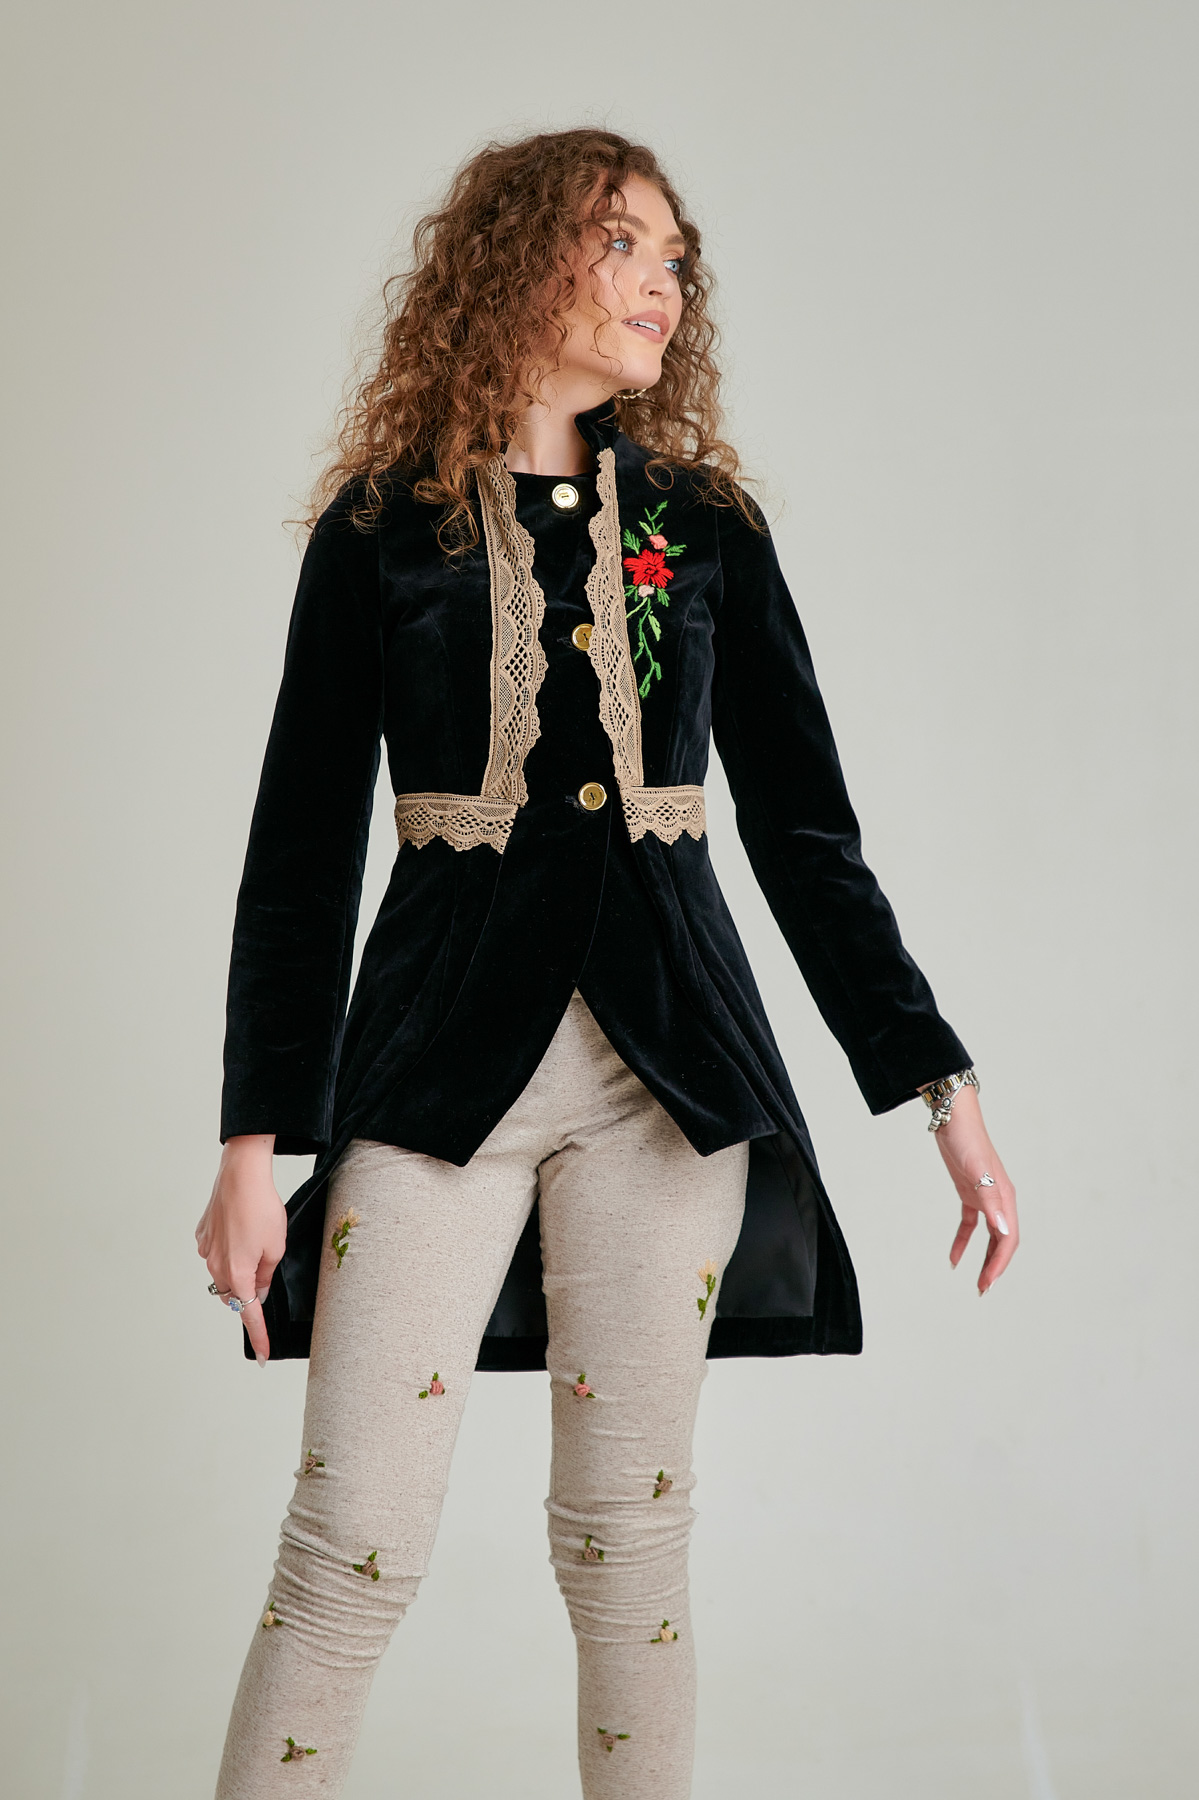 MADI trousers in jersey with embroidery. Natural fabrics, original design, handmade embroidery